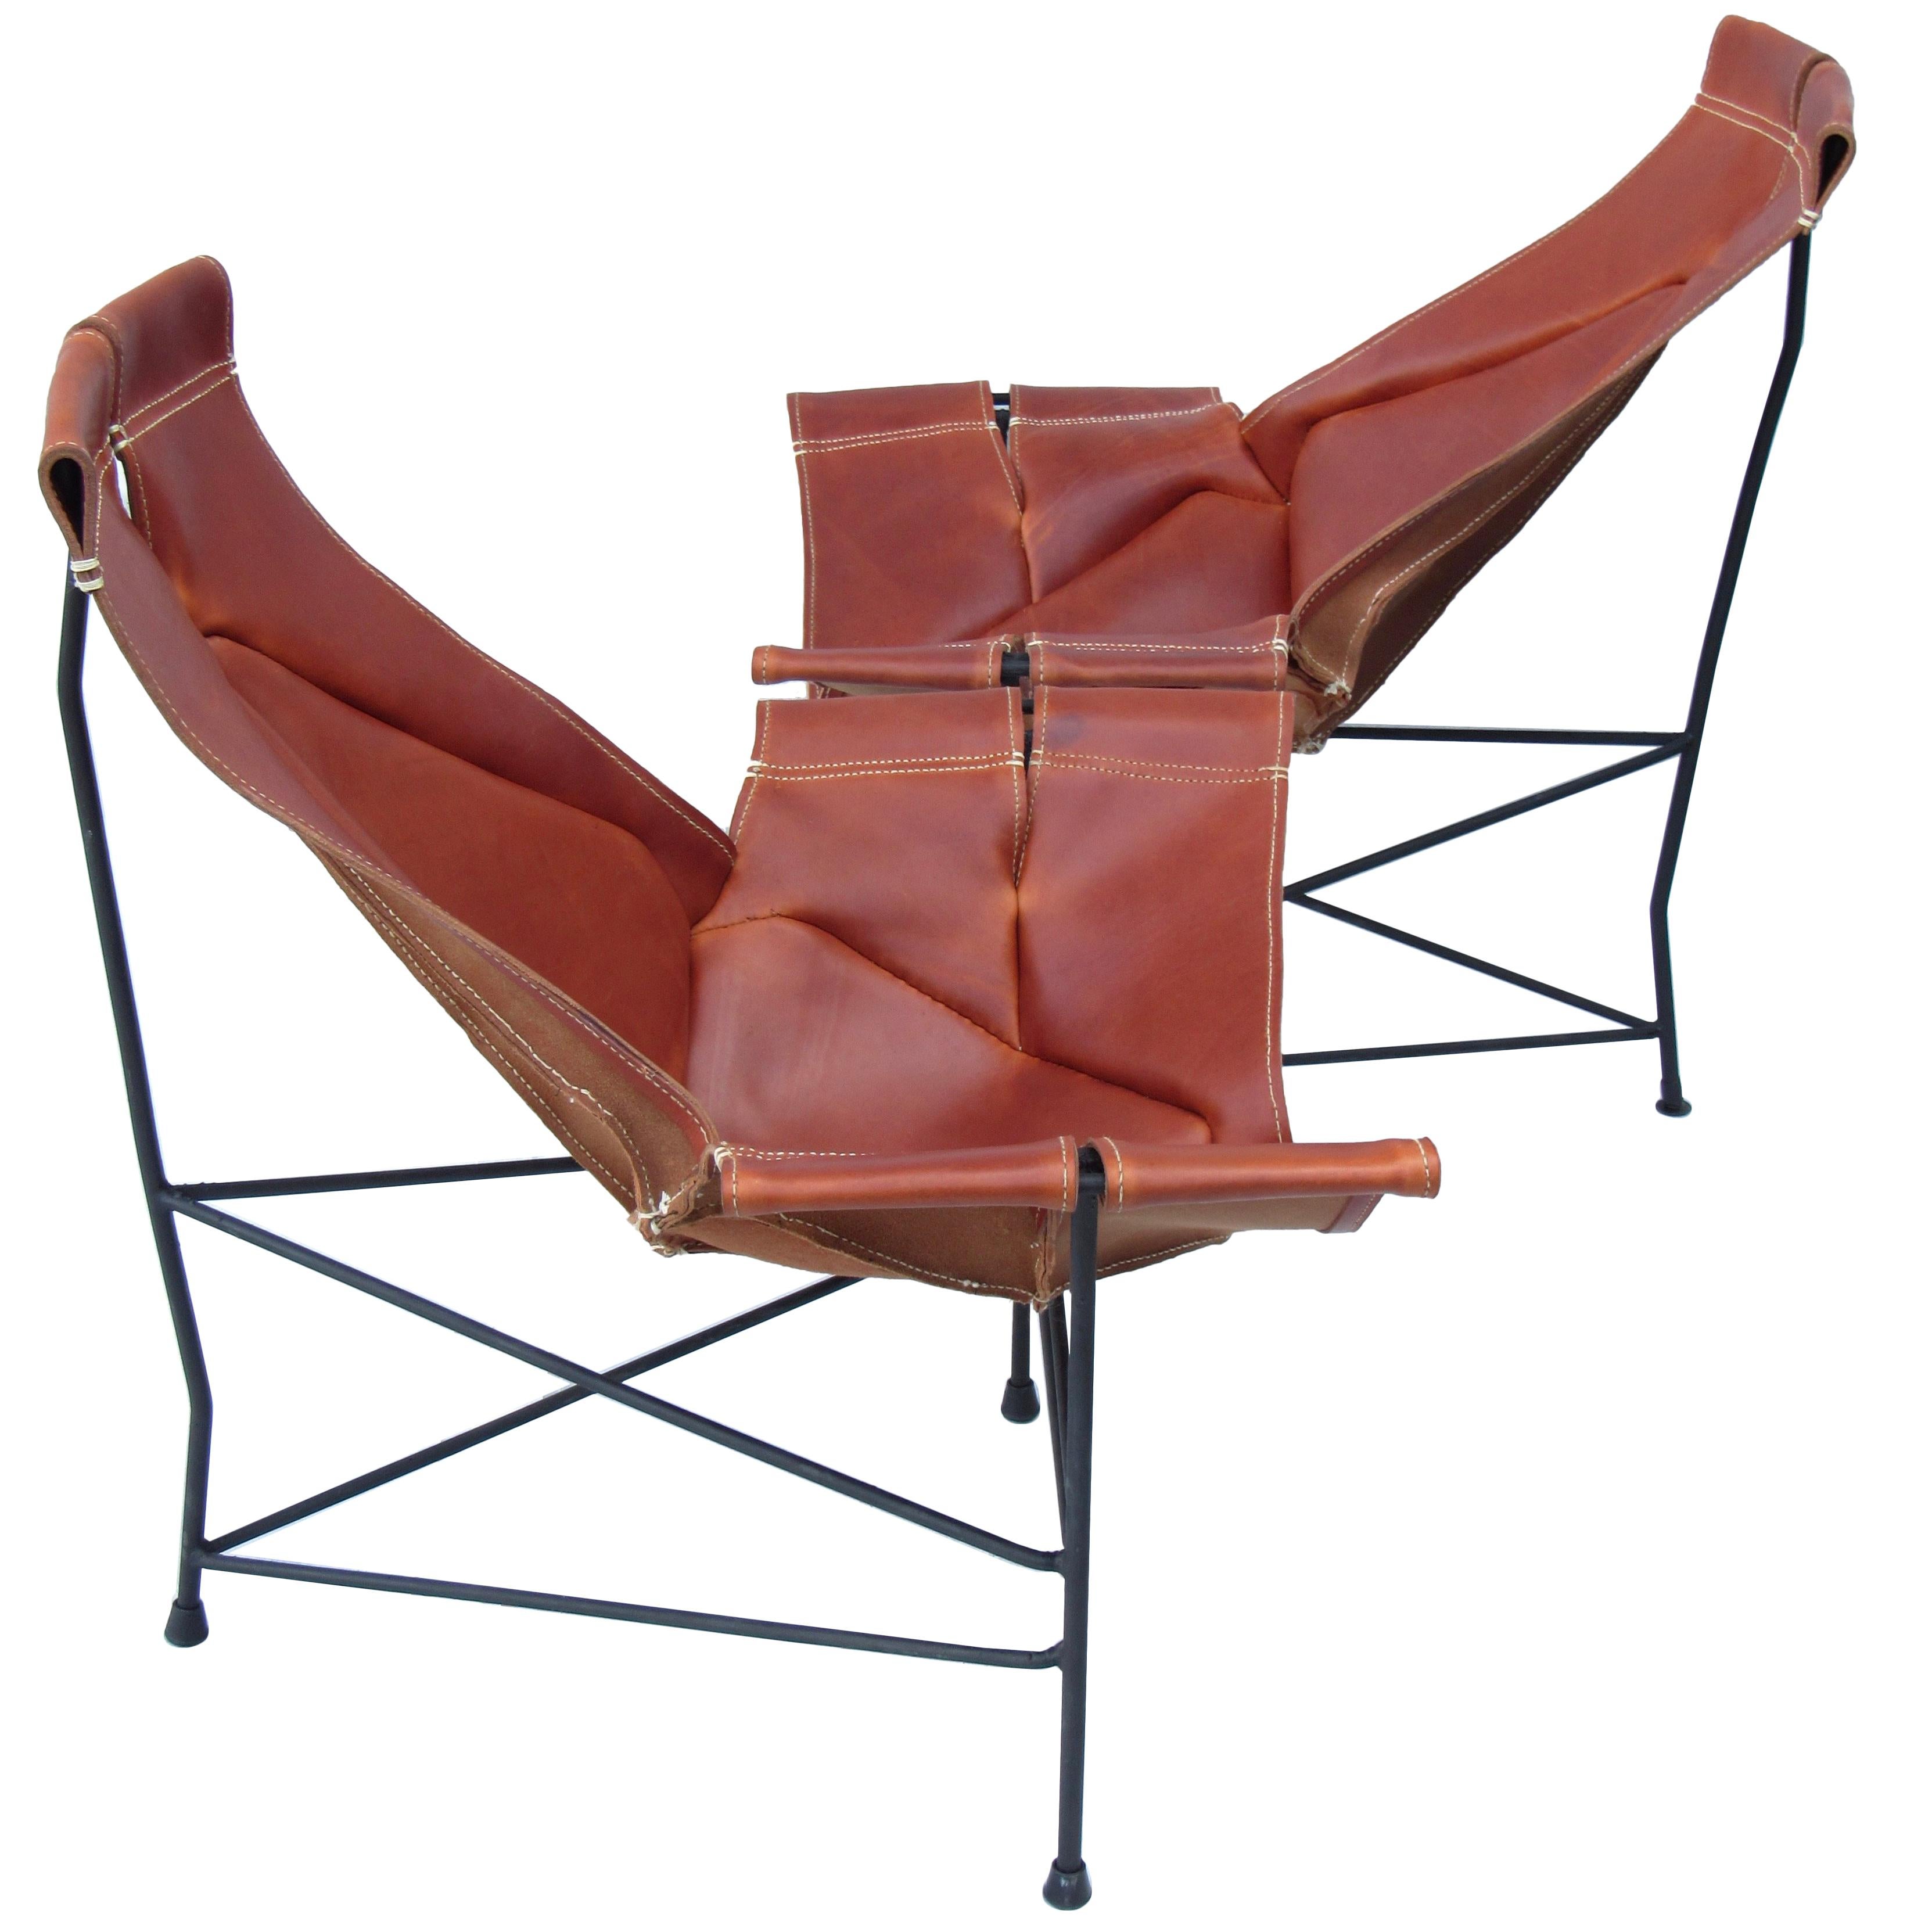 Wrought Iron Jerry Johnson Leather Sling Lounge Chair (3) Leathercraft 1954